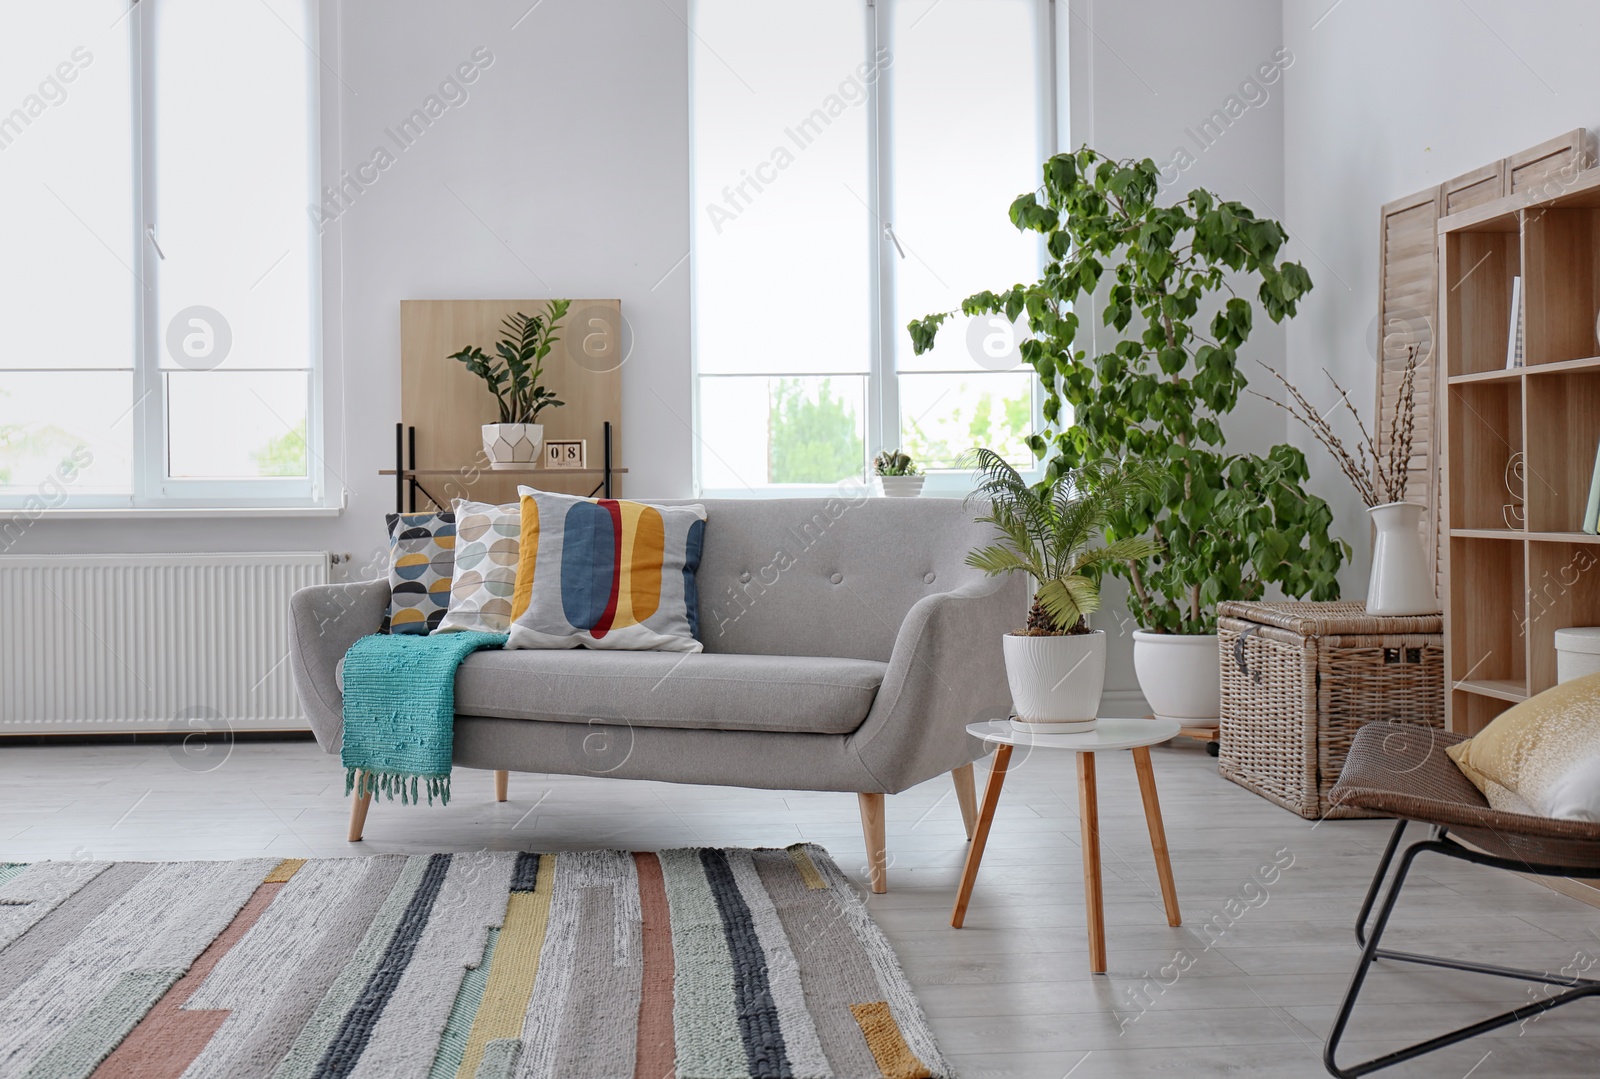 Photo of Elegant living room interior with comfortable sofa and striped carpet